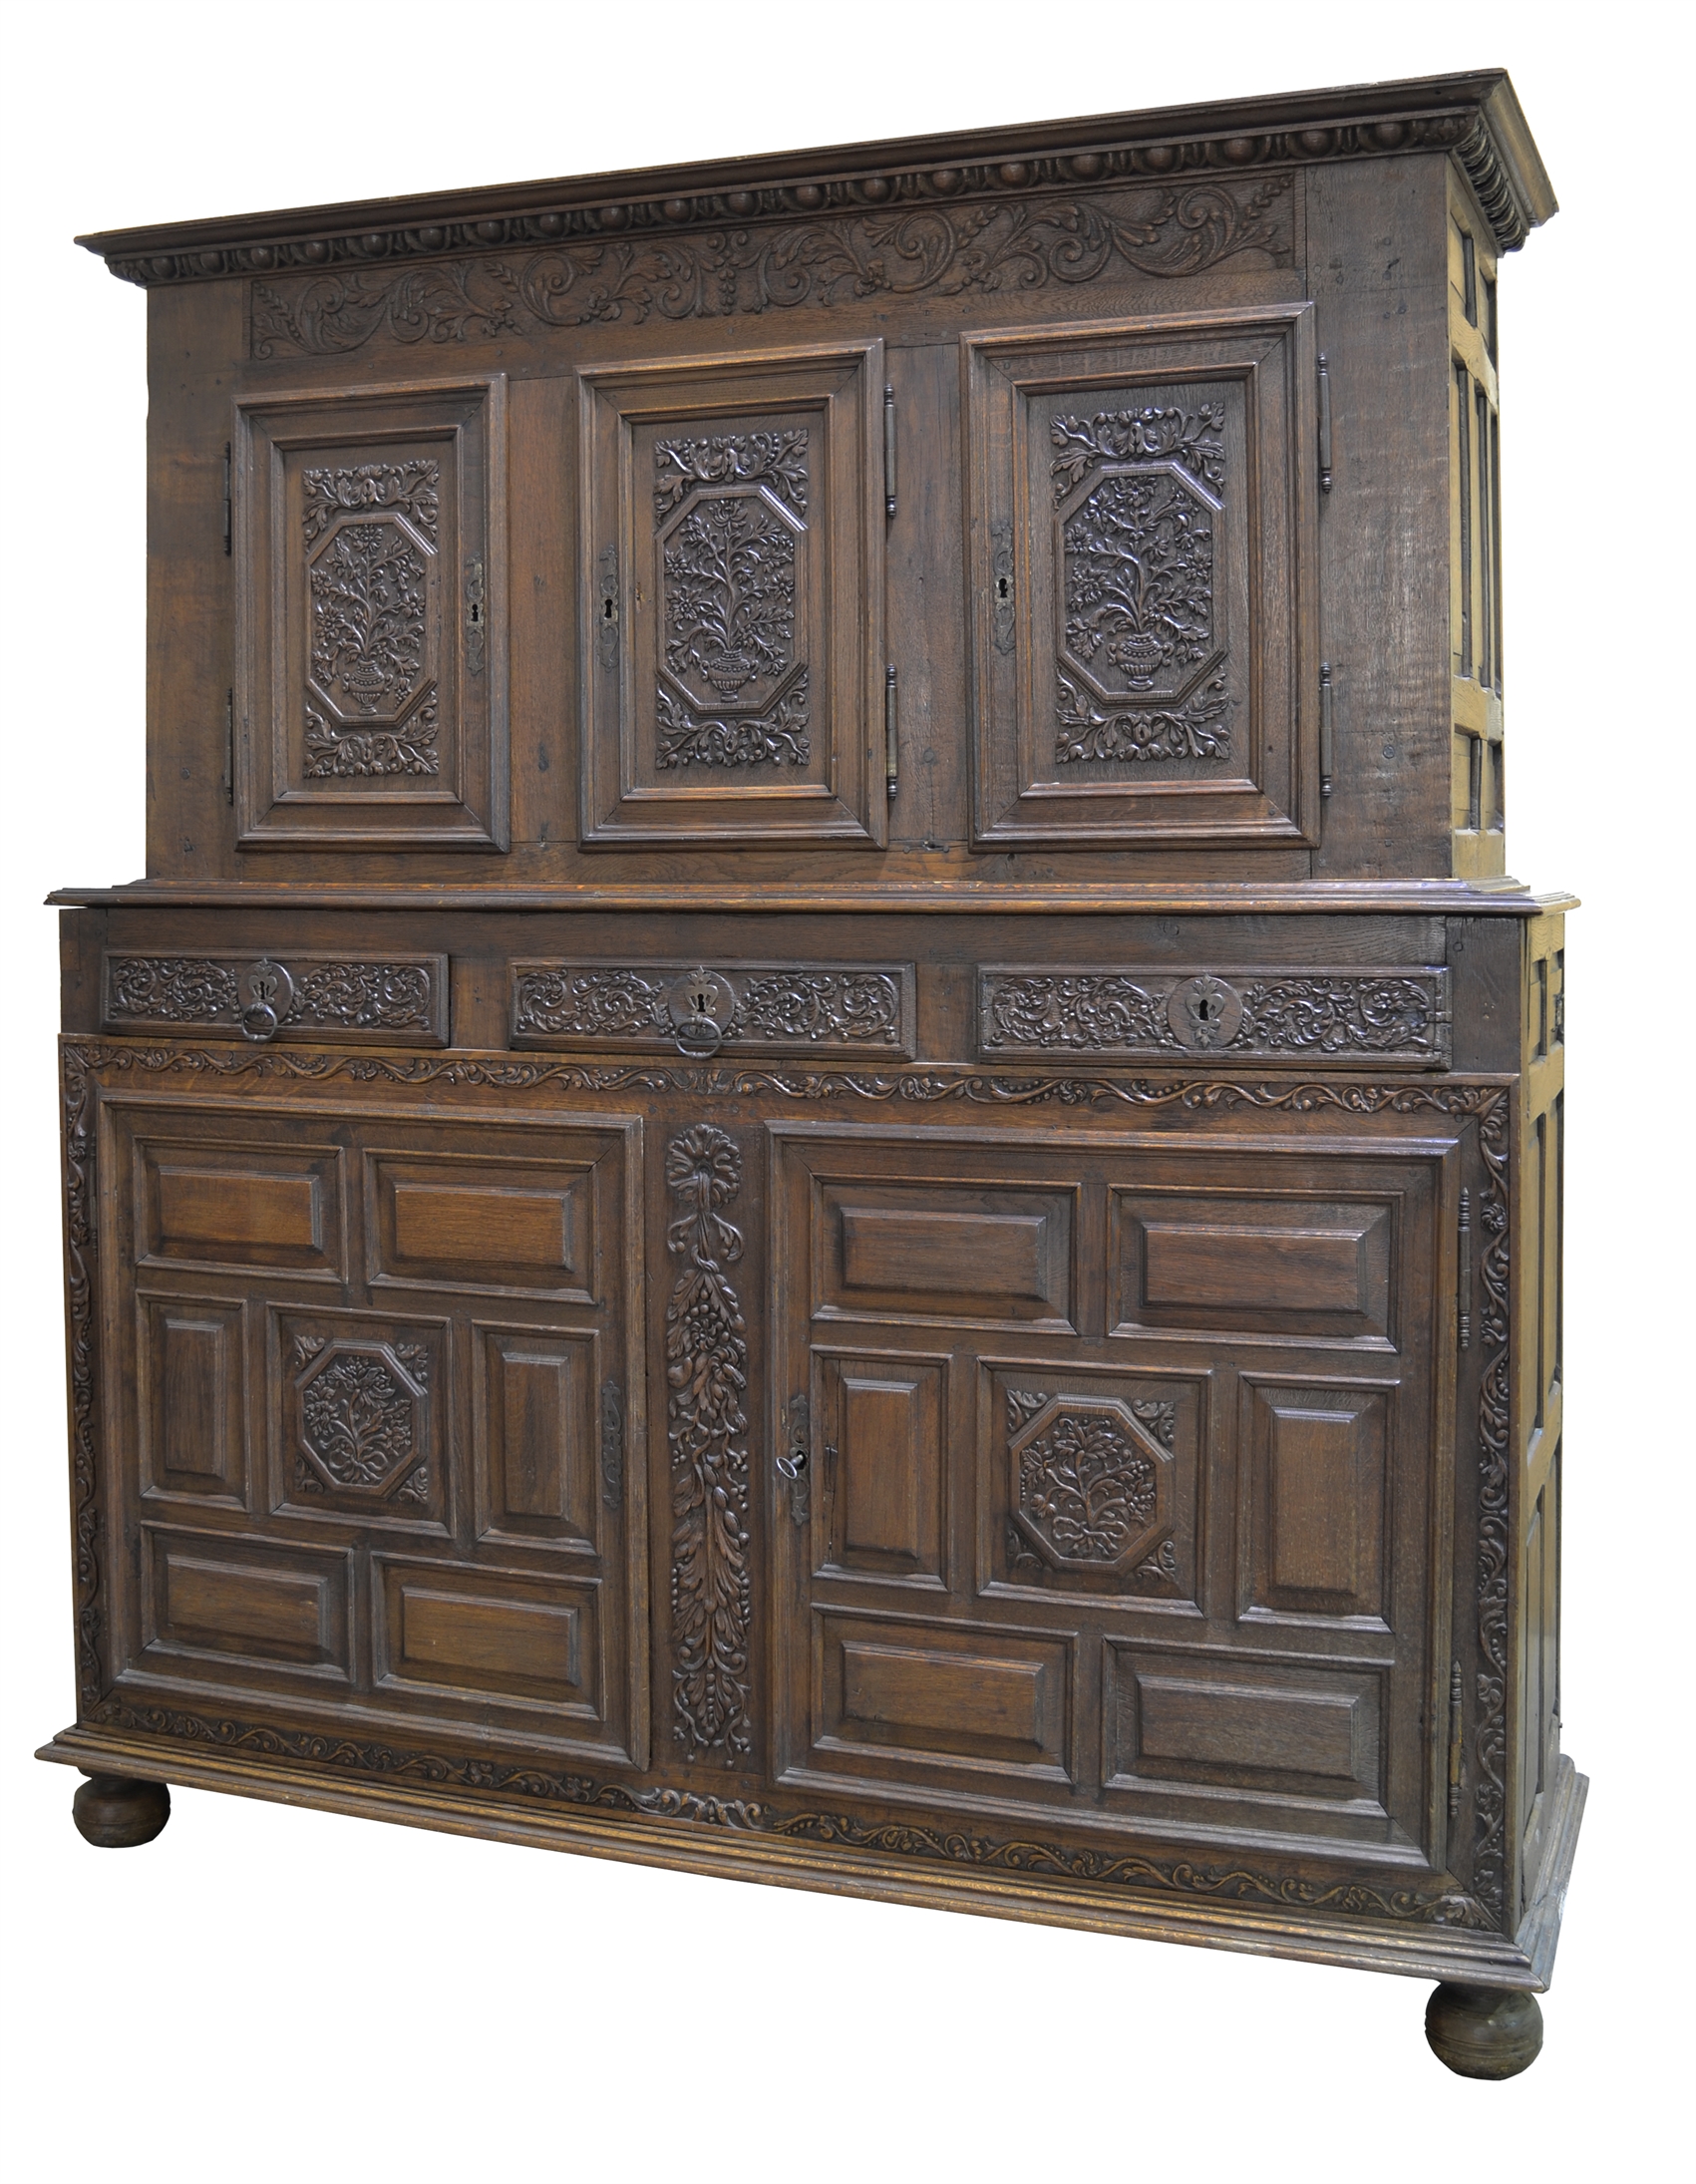 128/2055 - French Carved Oak Cabinet